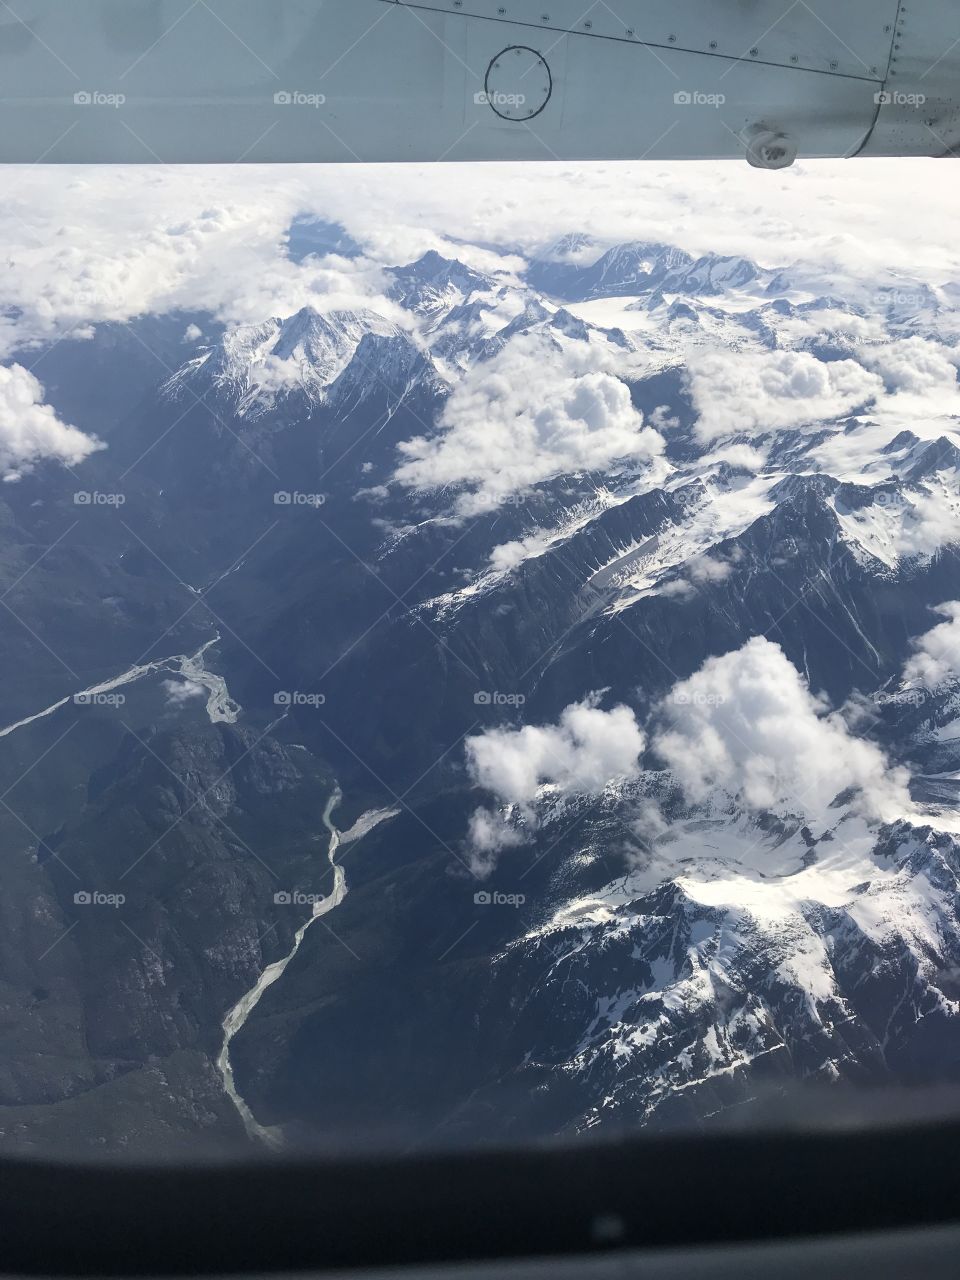 Flying on air canada back to whitehorse YT, from Vancouver BC, beautiful late morning view